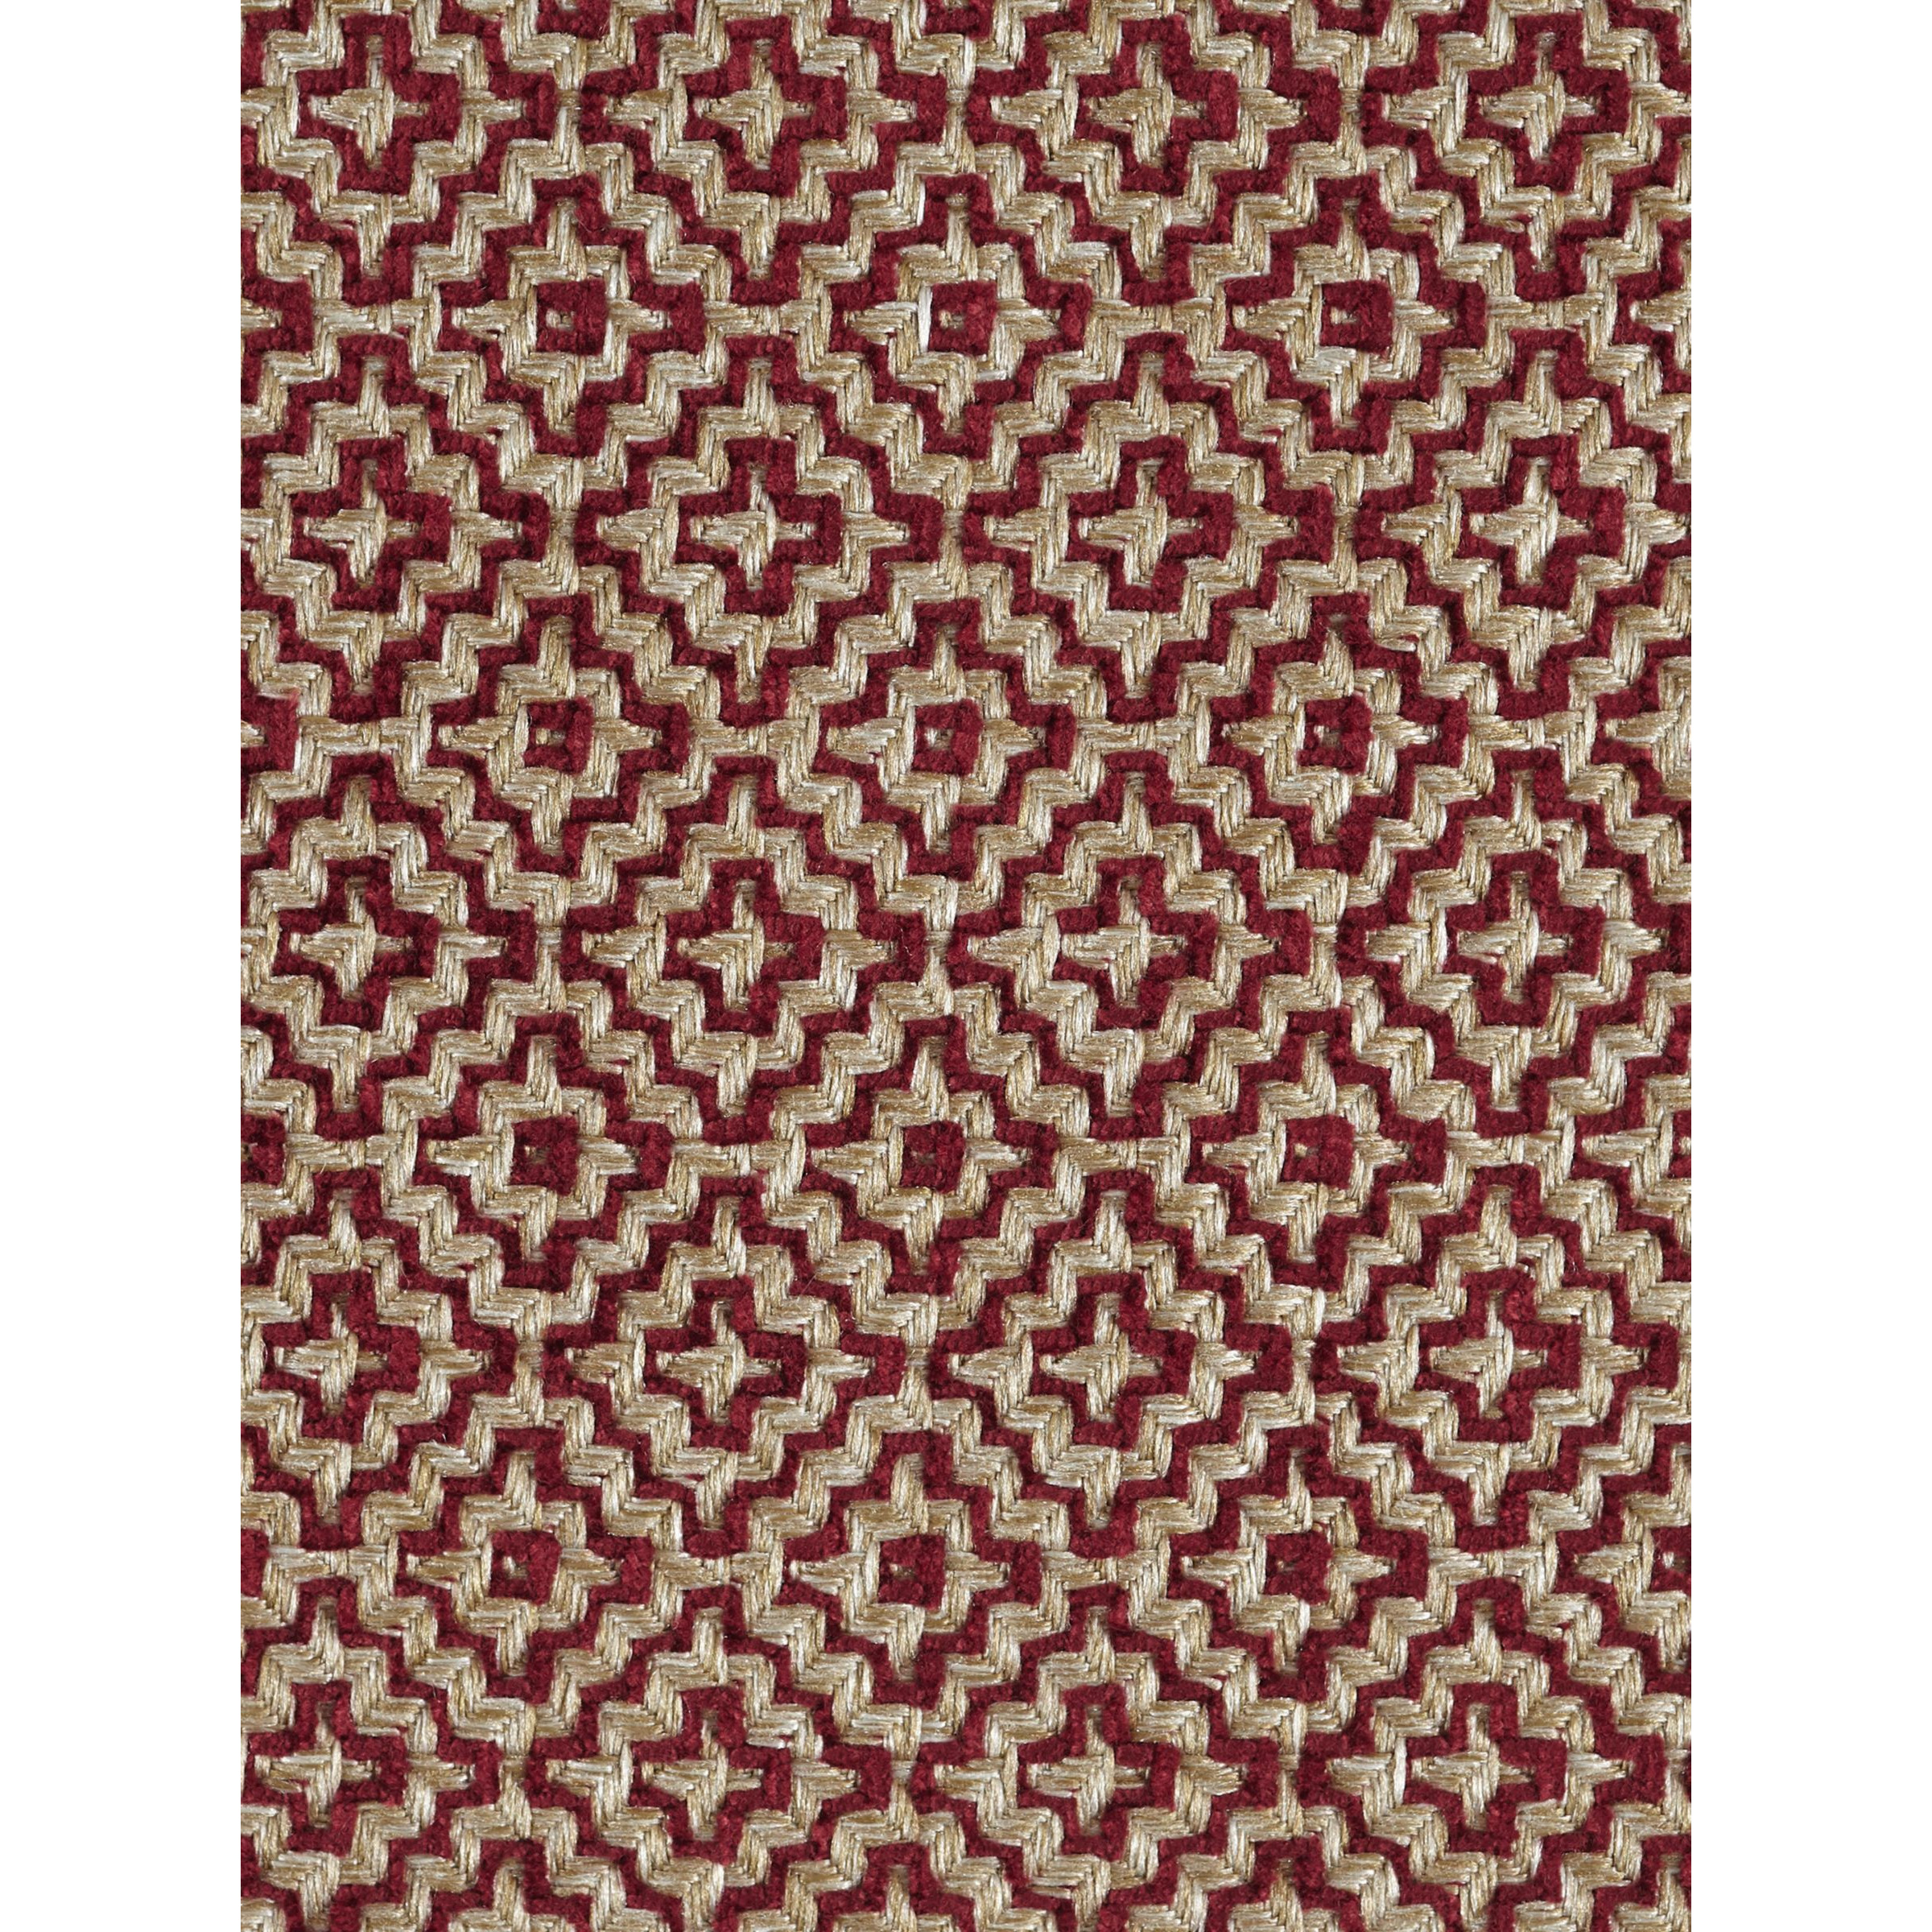 Sanderson Linden Made to Measure Curtains or Roman Blind, Russet - image 1